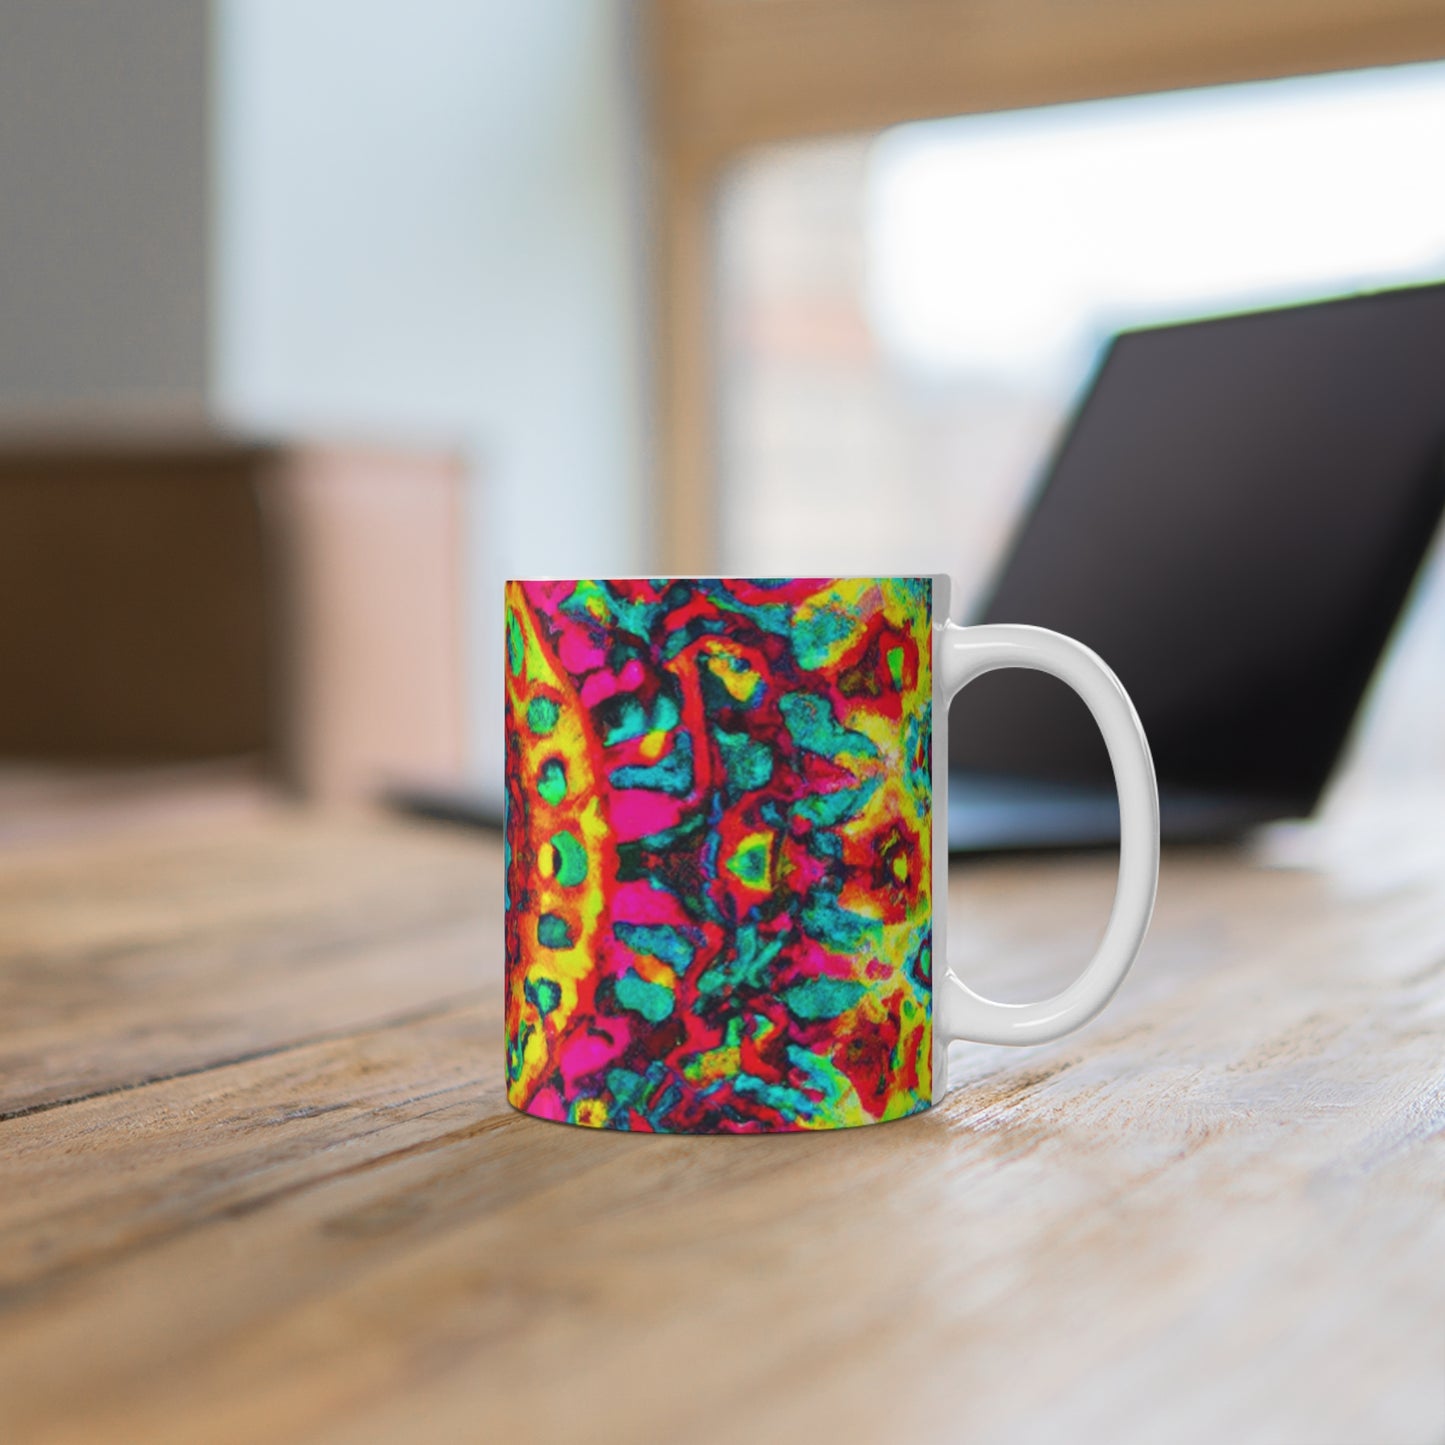 Clyde's Coffees - Psychedelic Coffee Cup Mug 11 Ounce